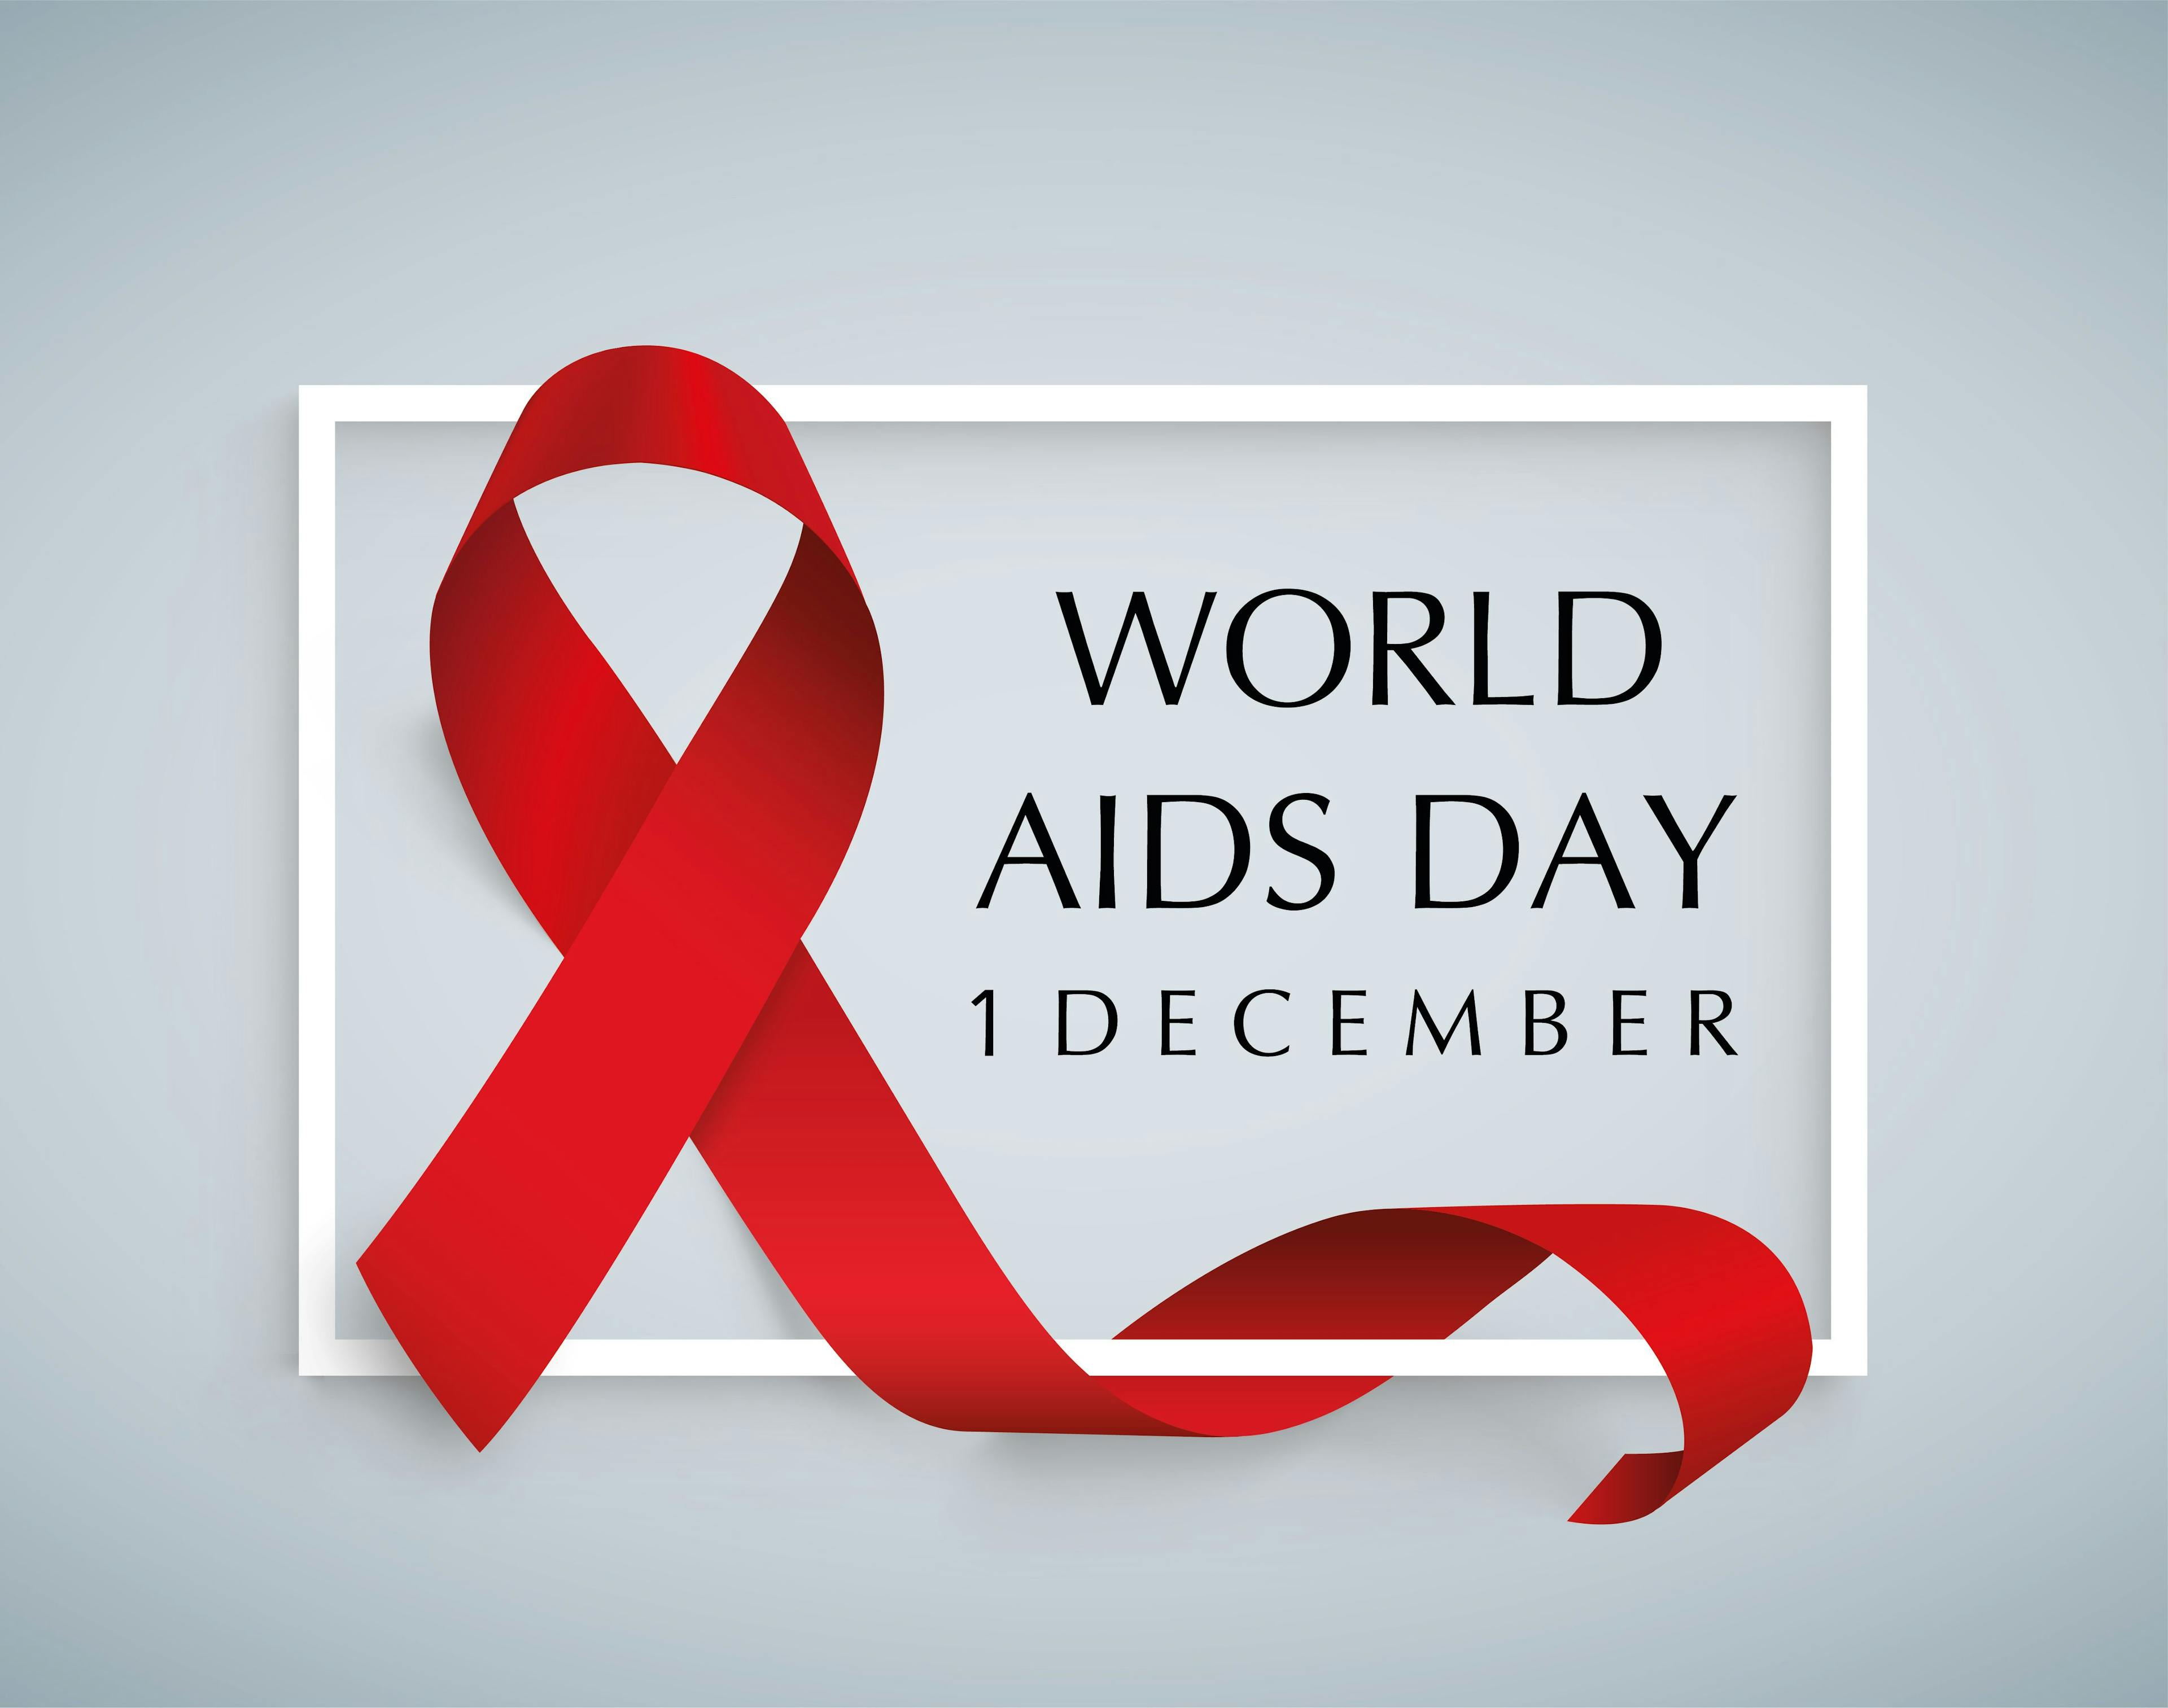 13 Things to Know About HIV/AIDS on World AIDS Day